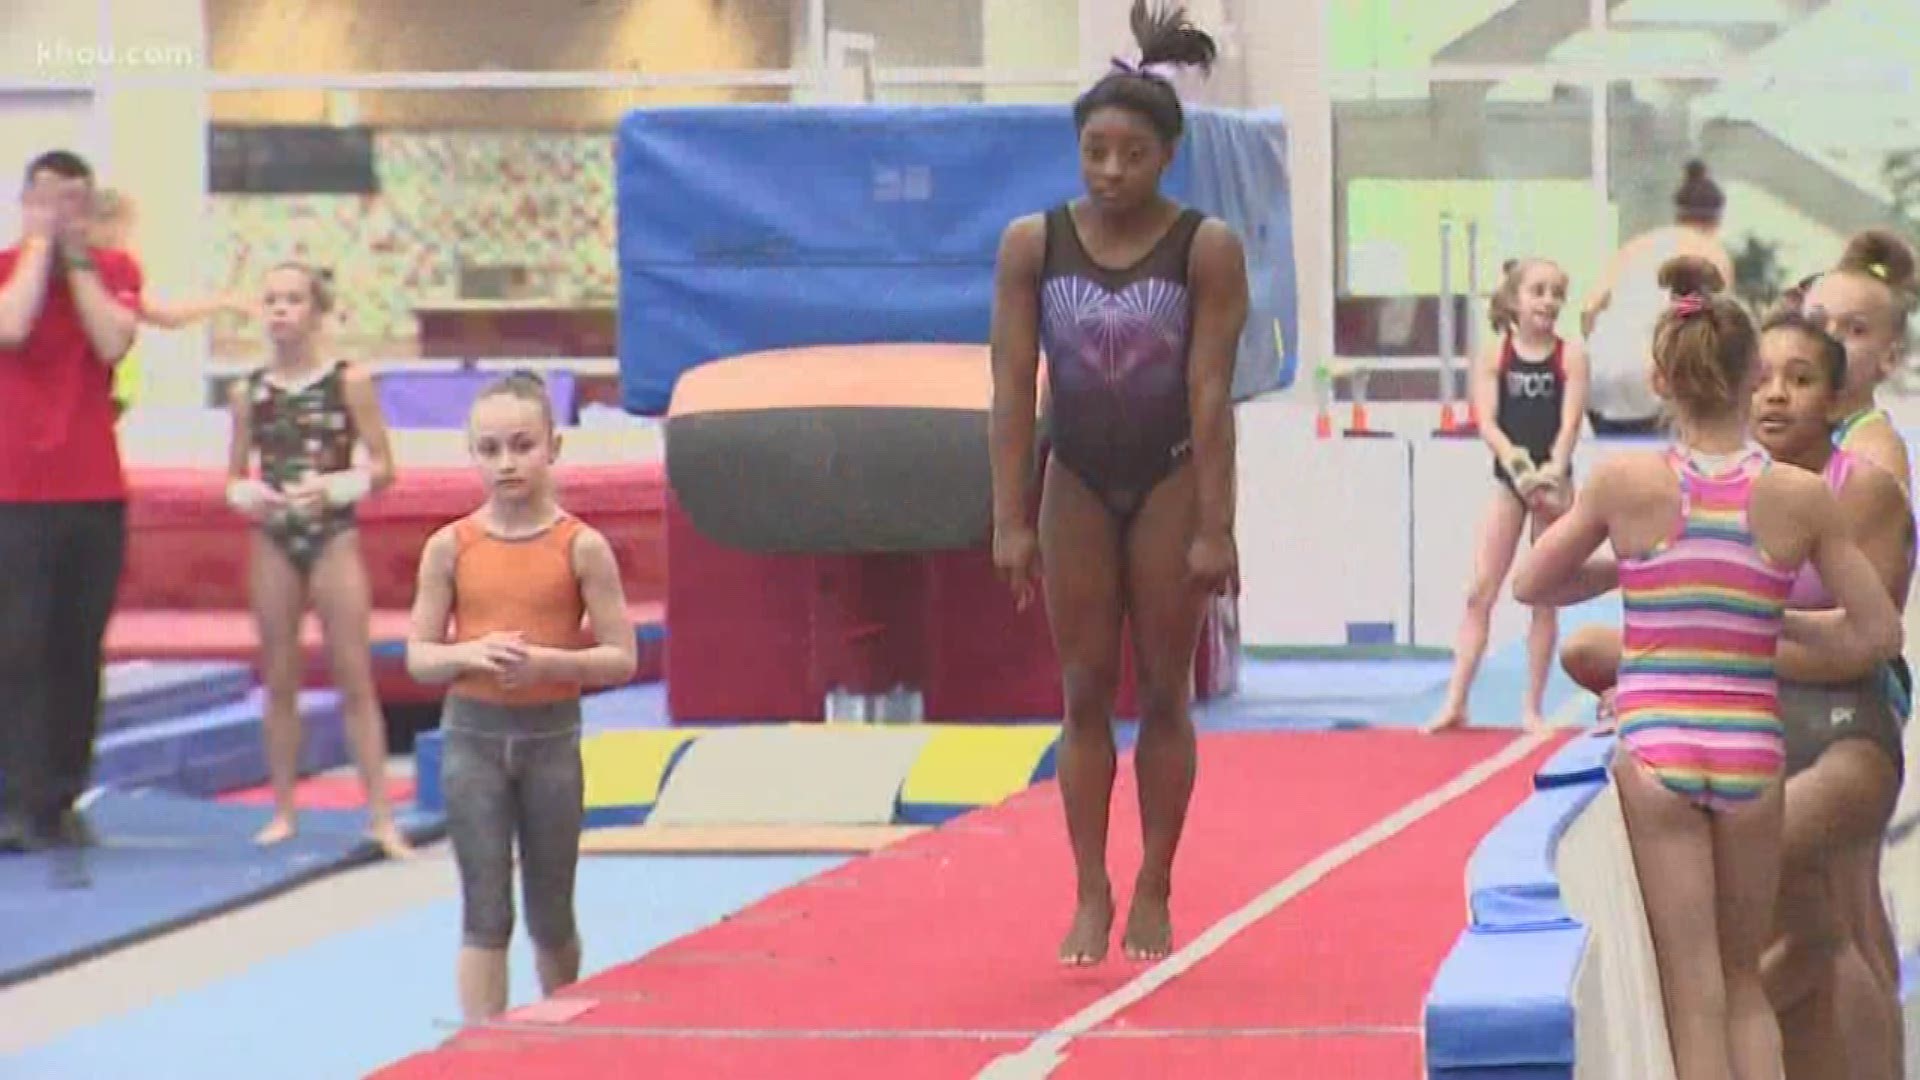 Olympic gold medalist Simone Biles is preparing for the GK Classic, performing moves many have never seen before.